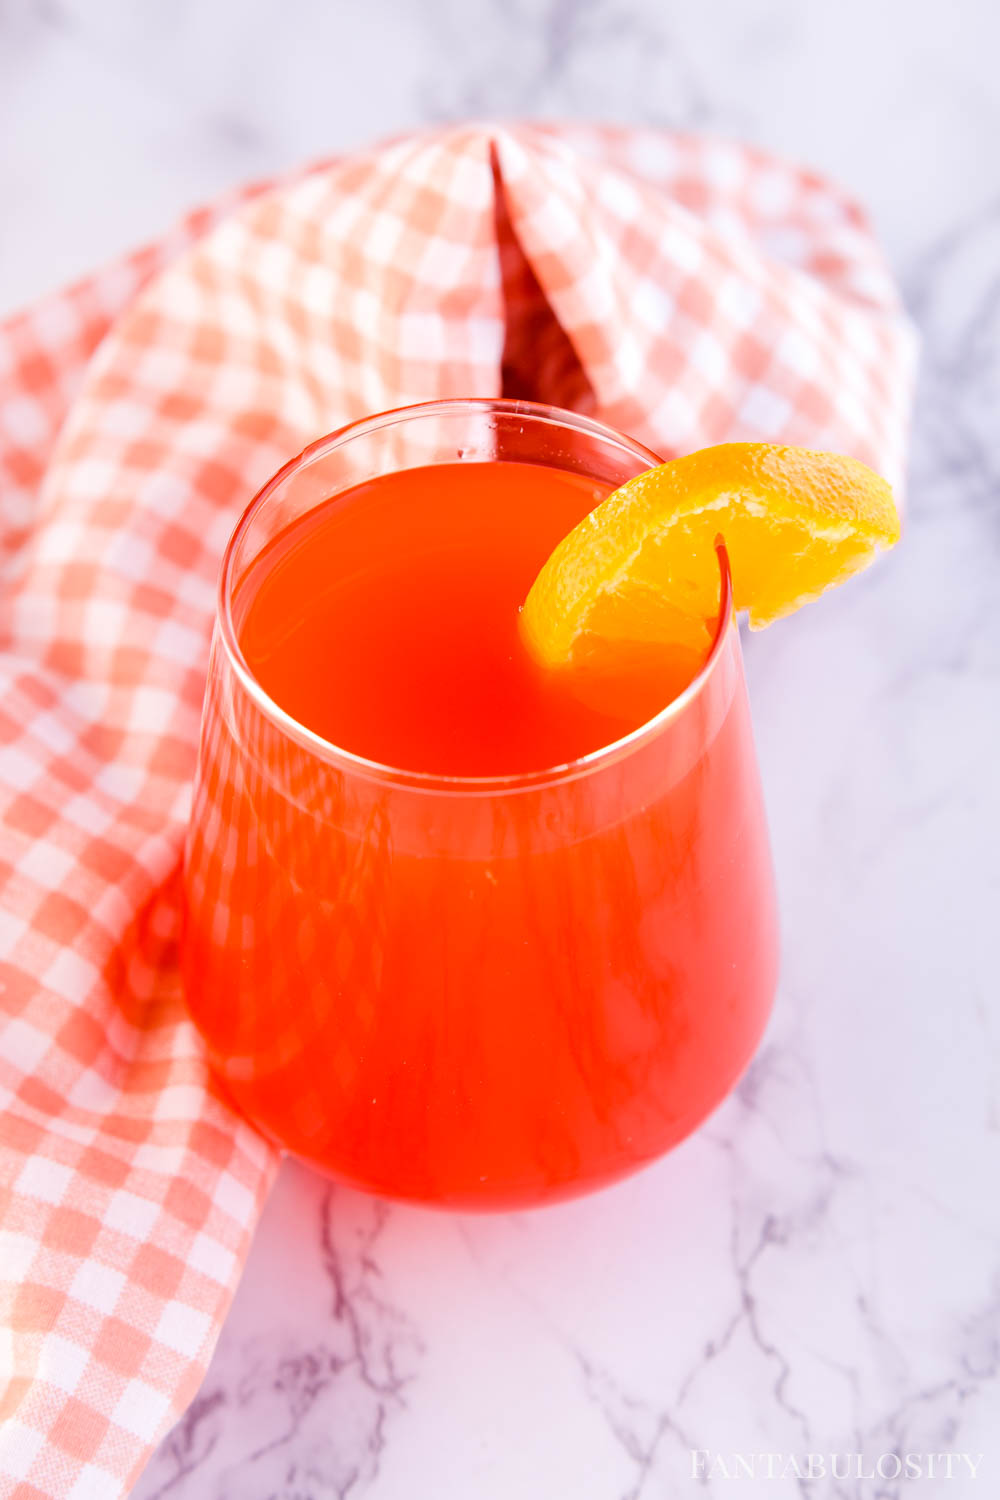 The BEST Fruit Punch Recipe - single serve in a glass with orange slice